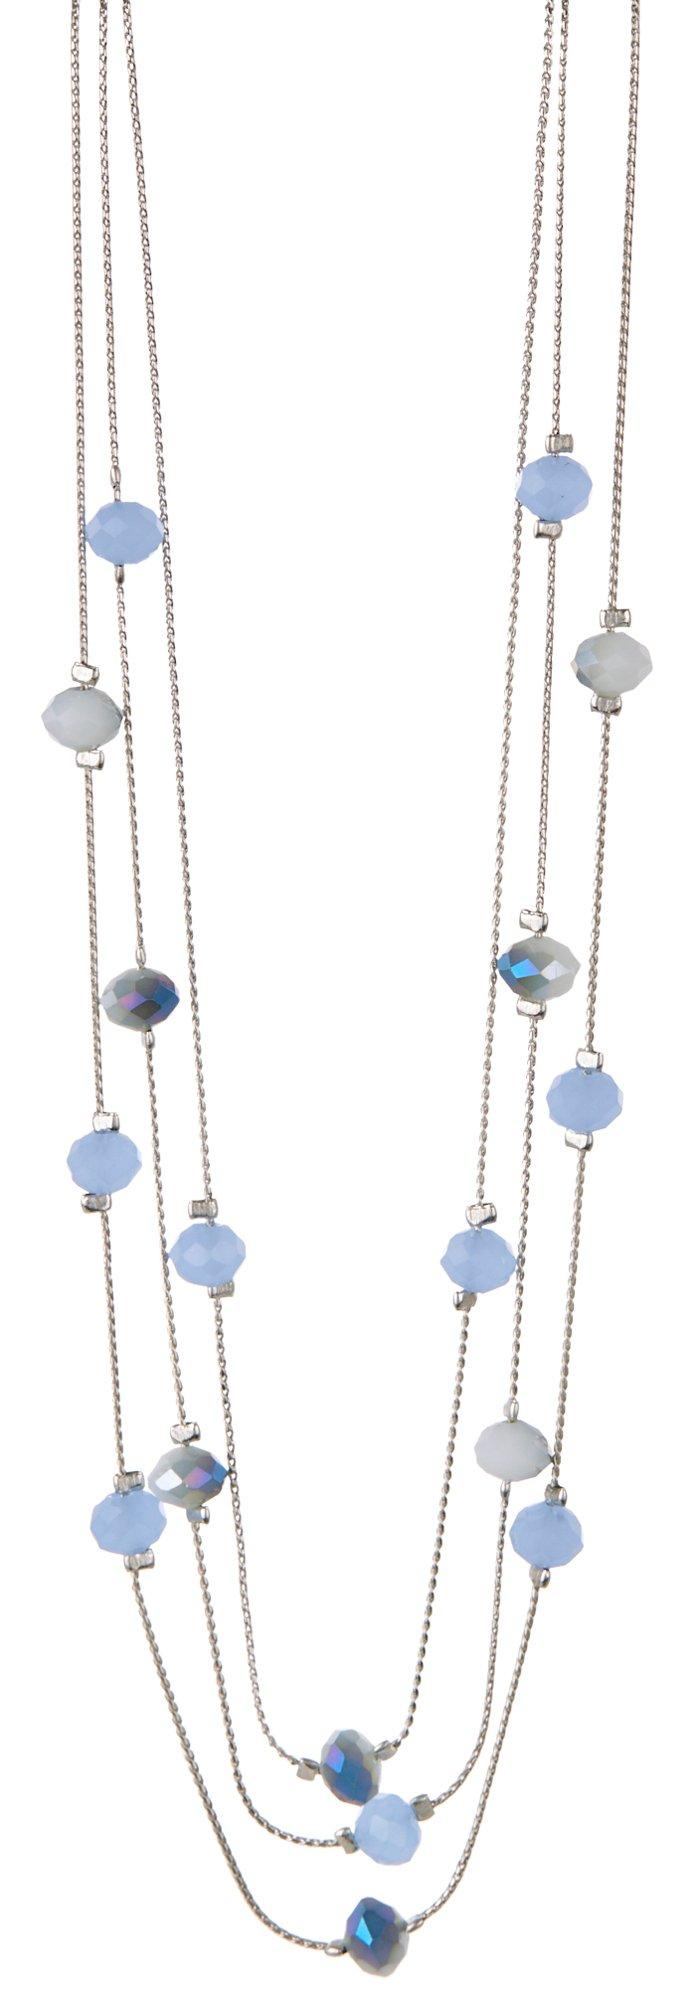 Bay Studio 3-Row 18 In. Beaded Illusion Necklace